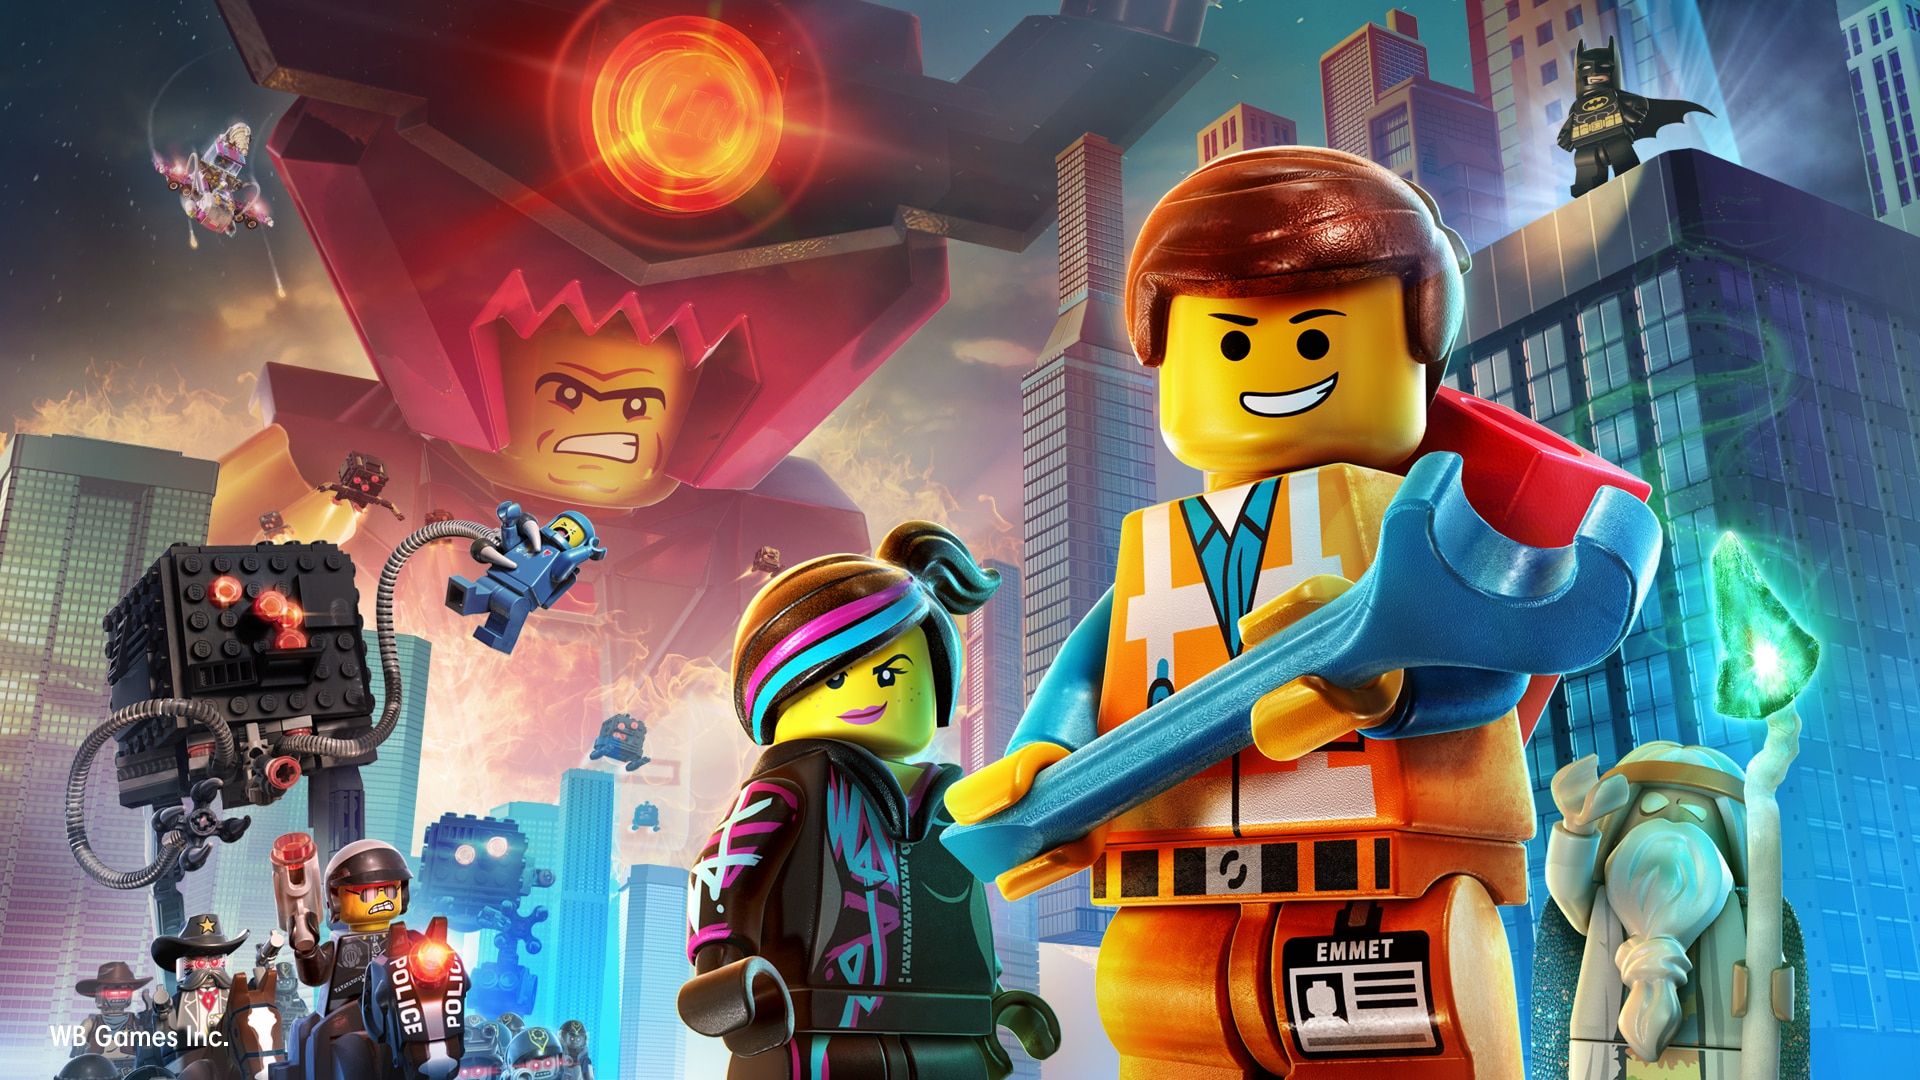 The LEGO® Movie - Videogame cover image